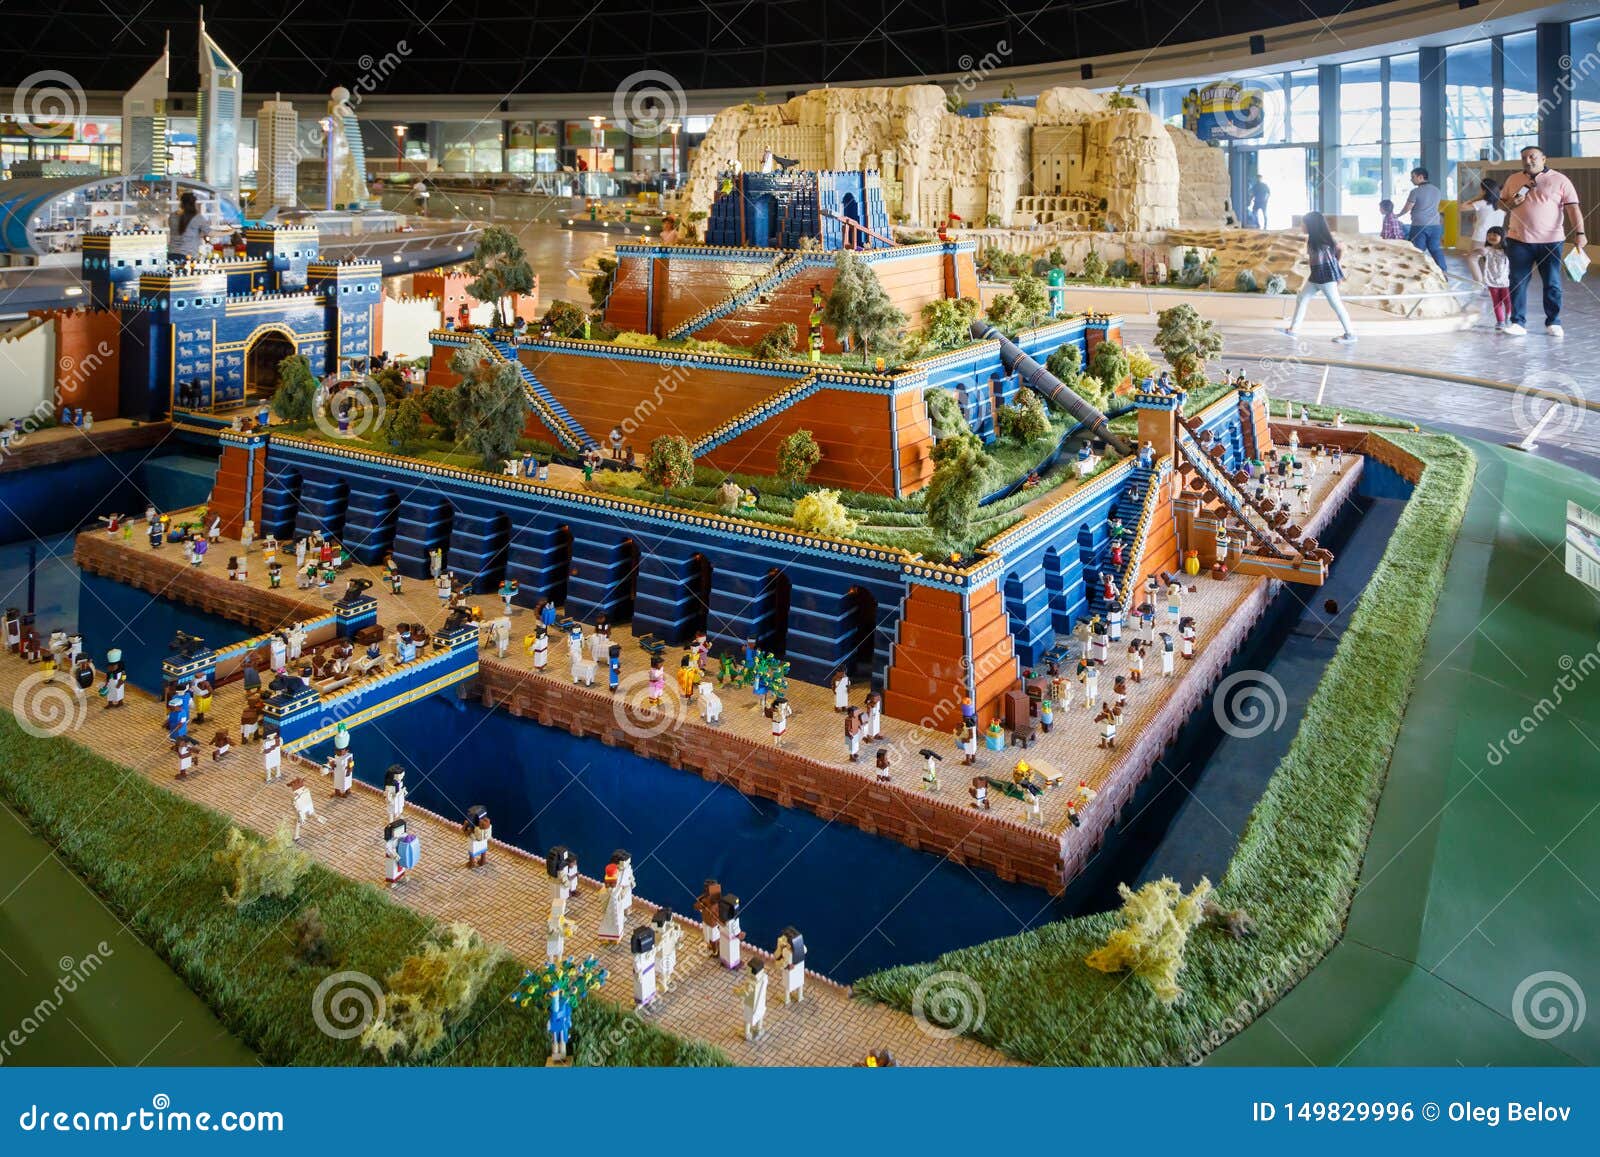 Lego Miniature Of The Hanging Gardens Of Babylon One Of The Seven